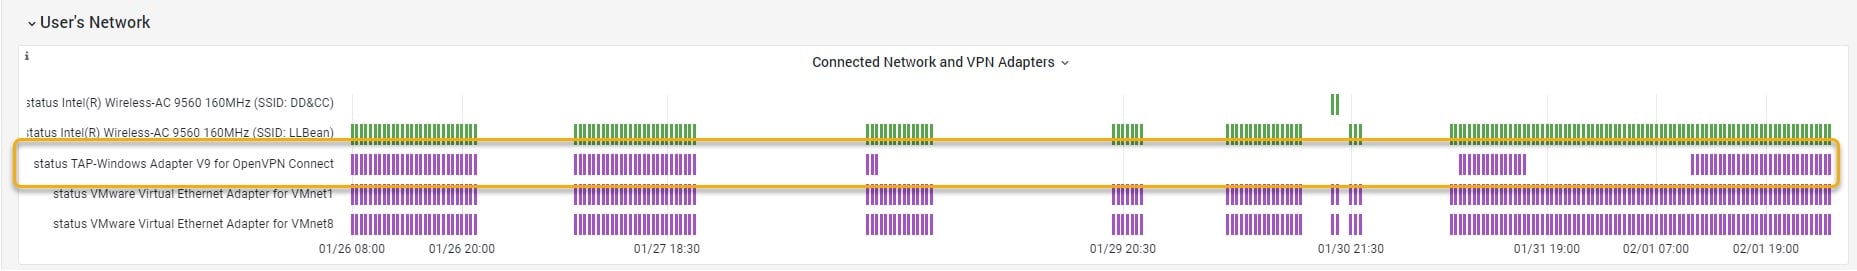 OfficeExpert | Connected network and VPN adapters